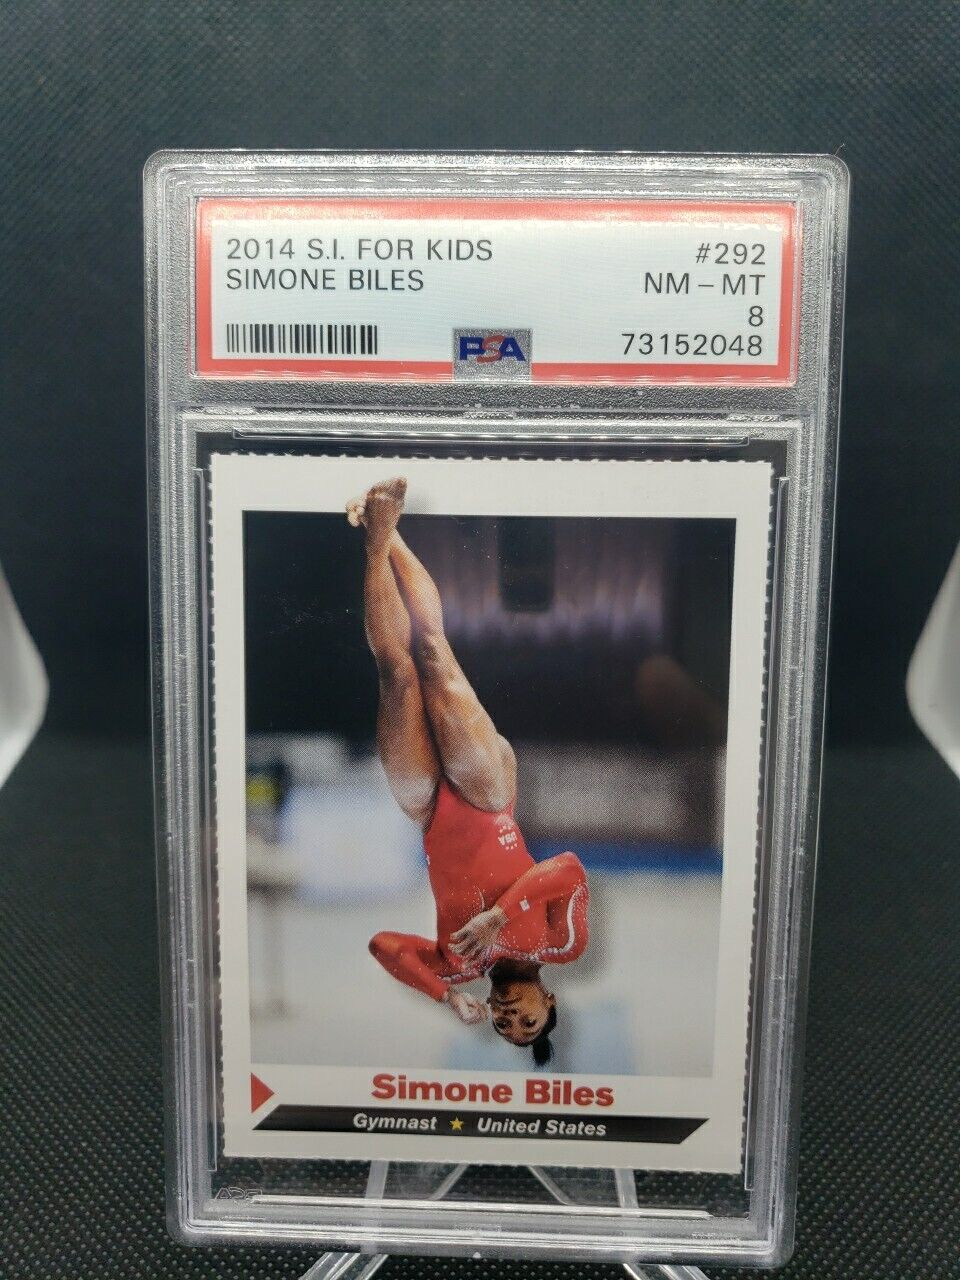 2014 Sports Illustrated SI For Kids Simone Biles Rookie RC #292 PSA 8